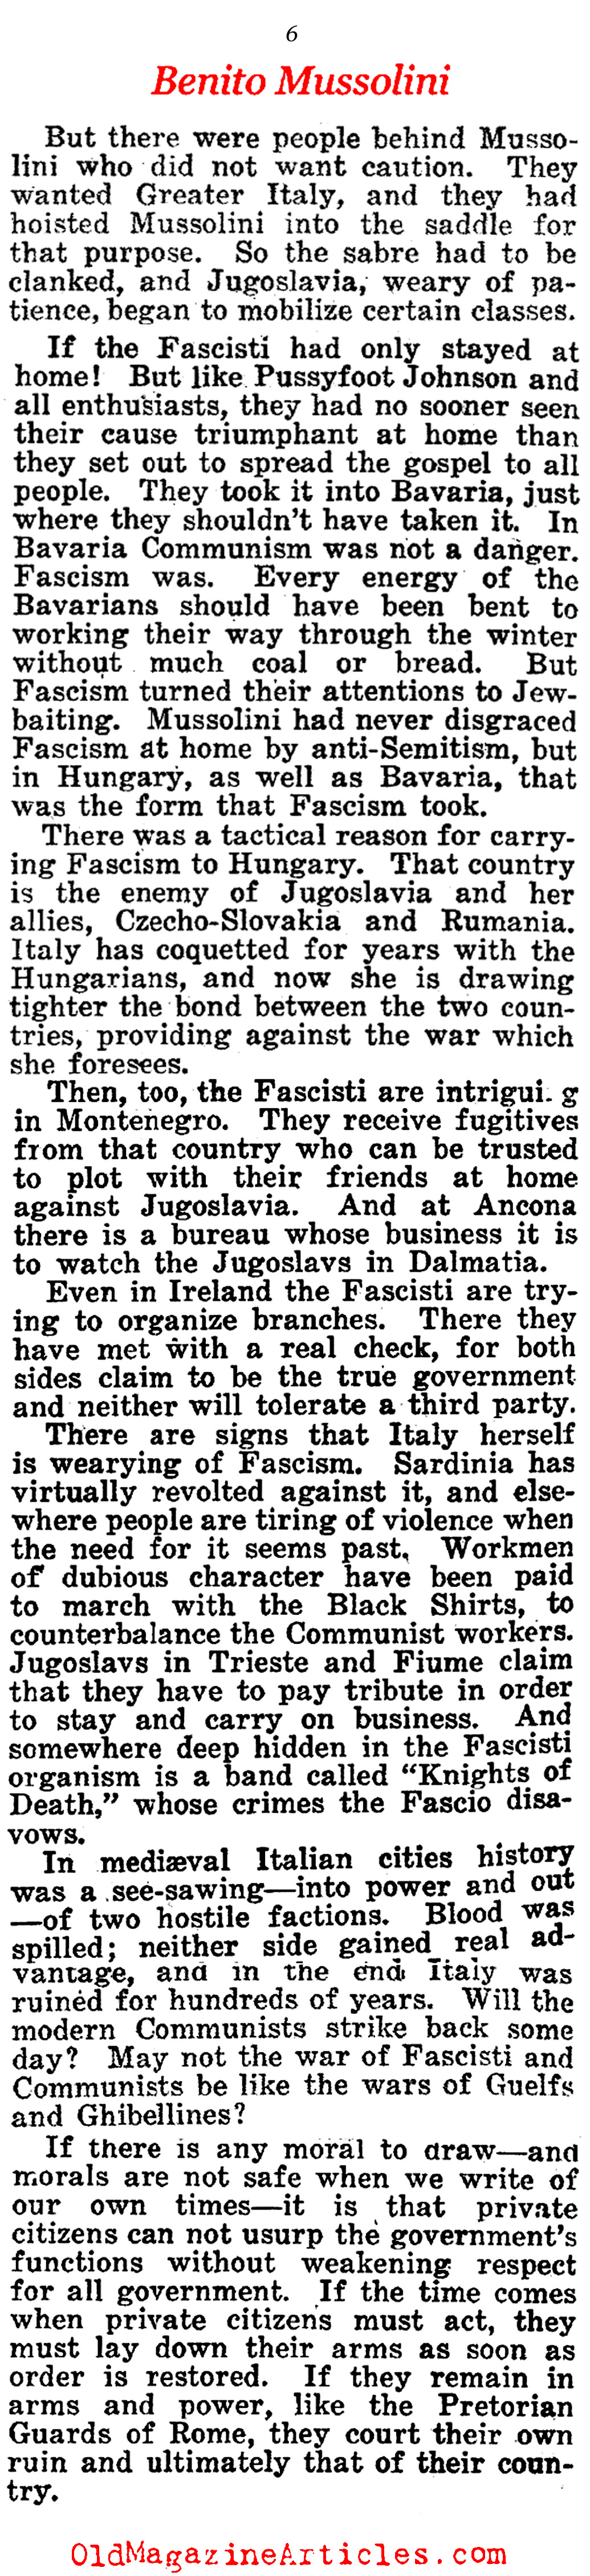 Benito Mussolini And His Followers  (American Legion Weekly, 1923)